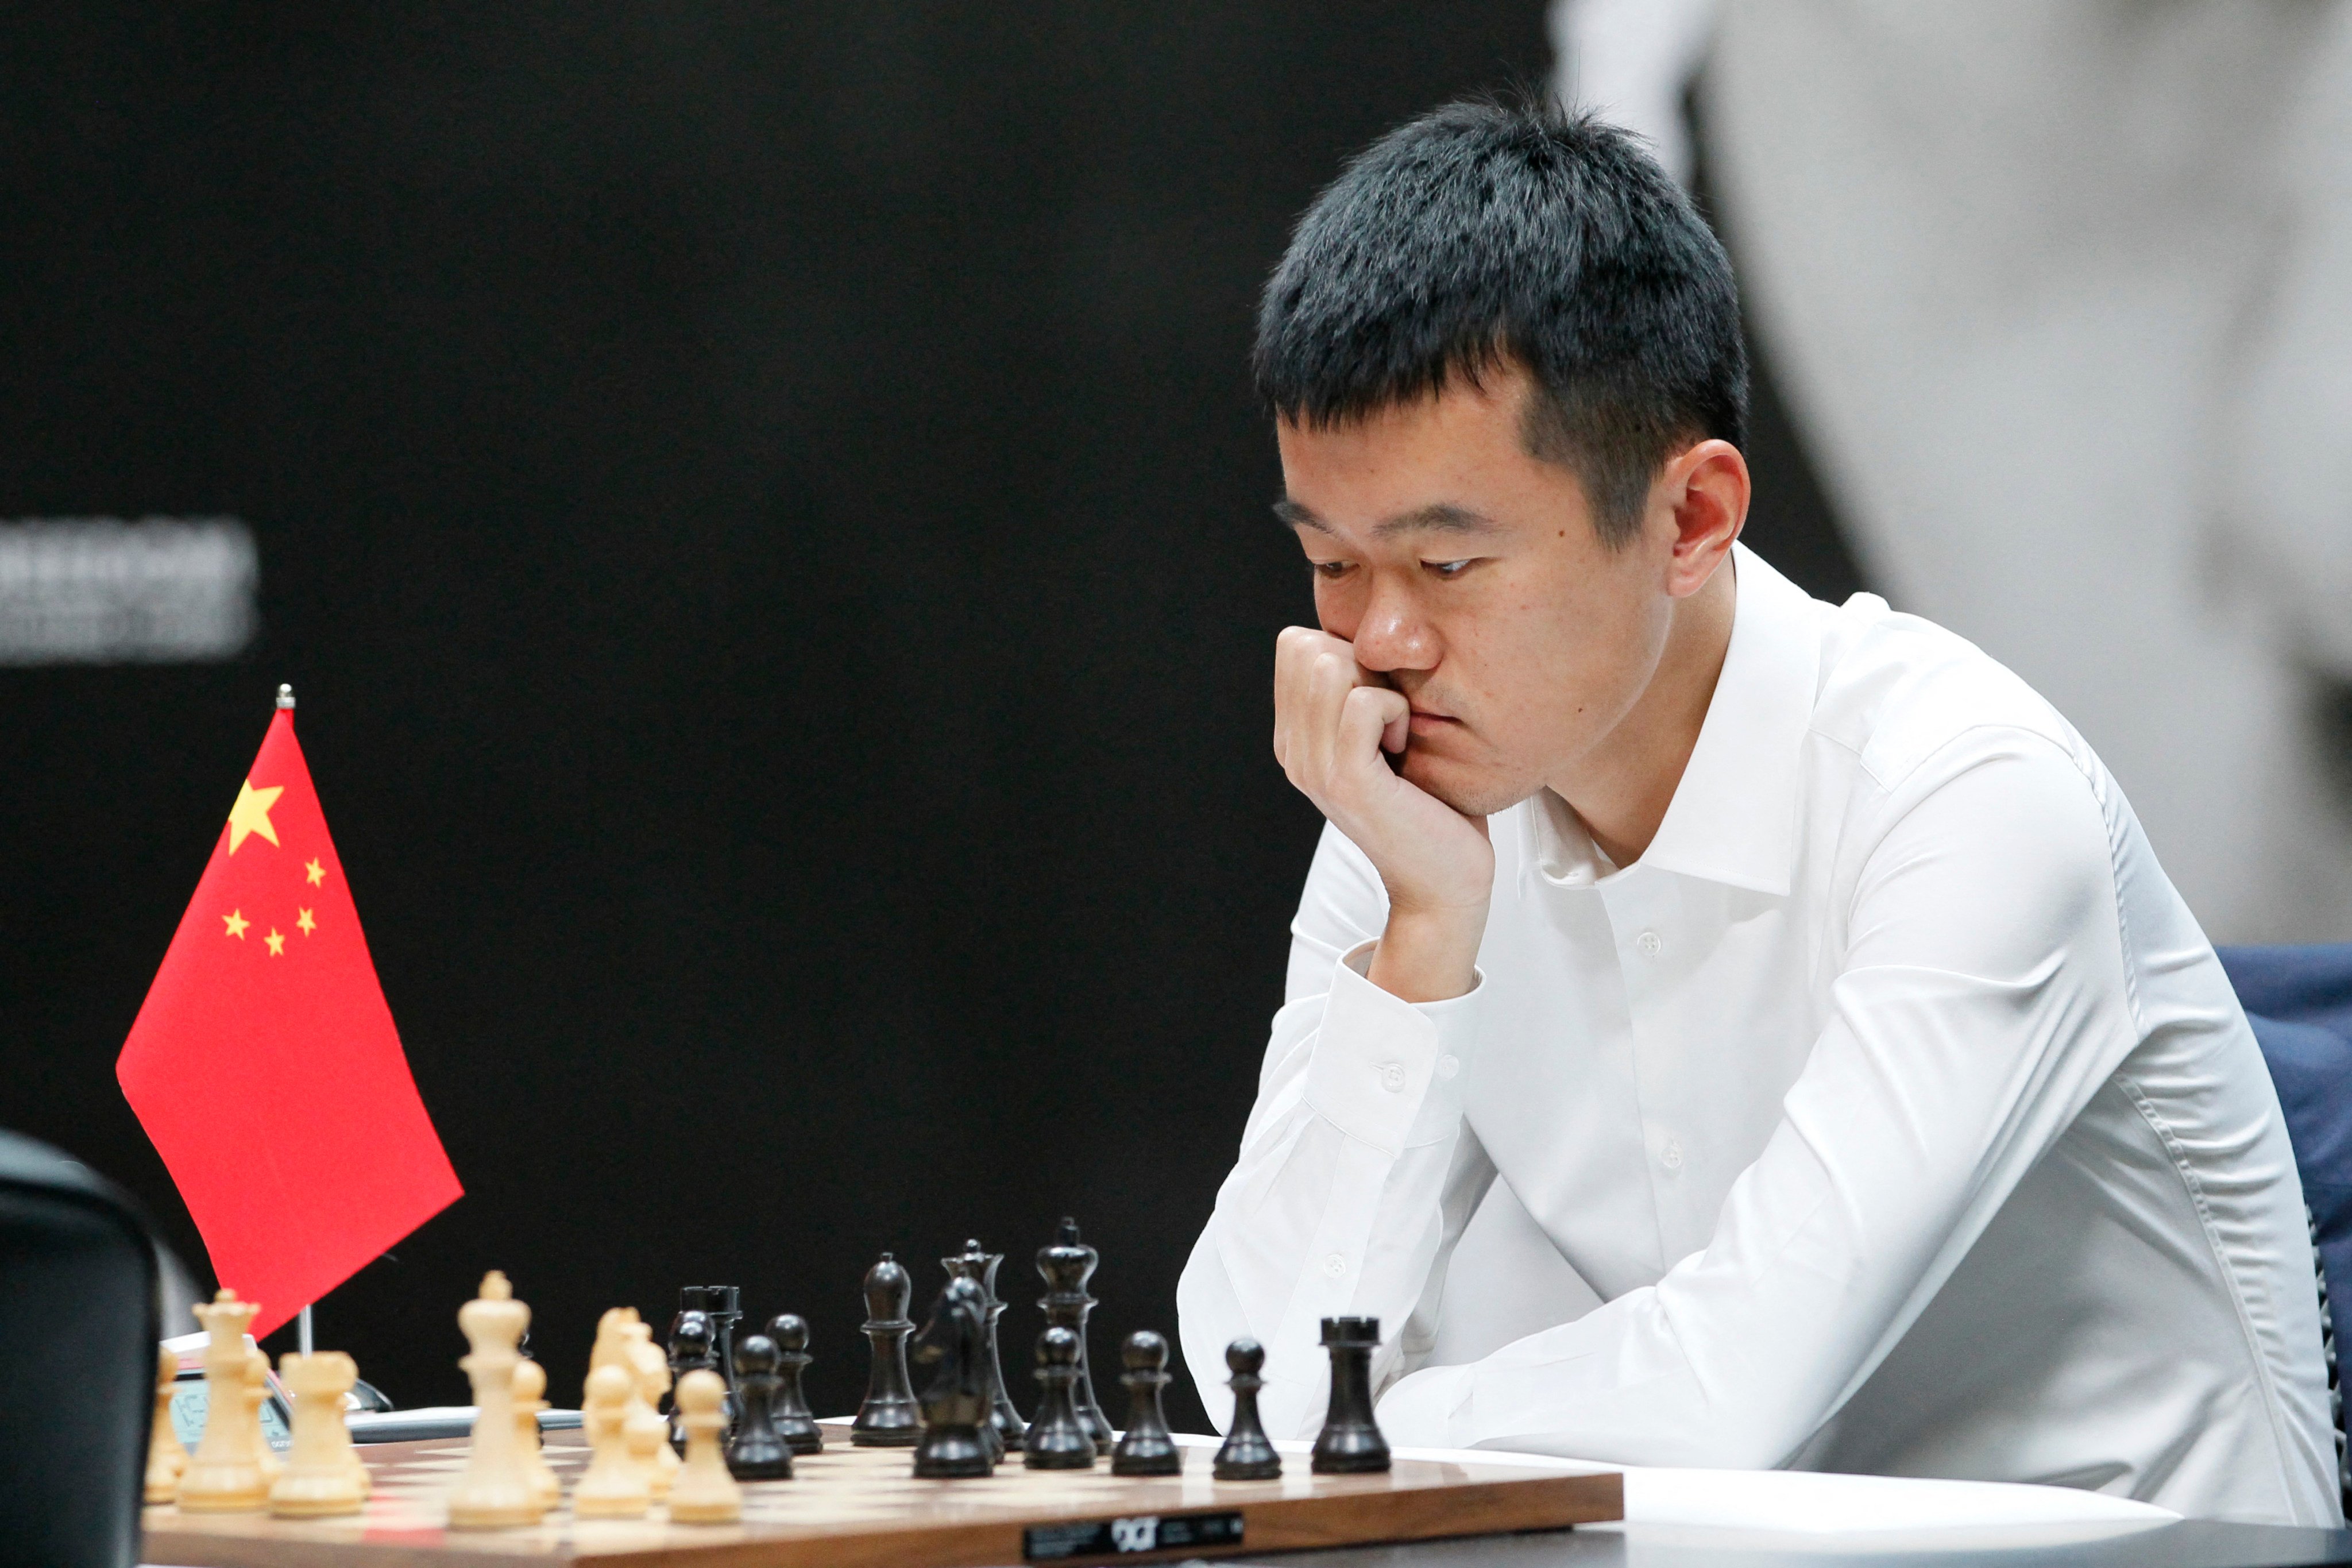 By winning the World Chess Championship, Ding, China’s 30th grandmaster, helped China achieve its ambition of becoming a dominant force in world chess. Photo: AFP